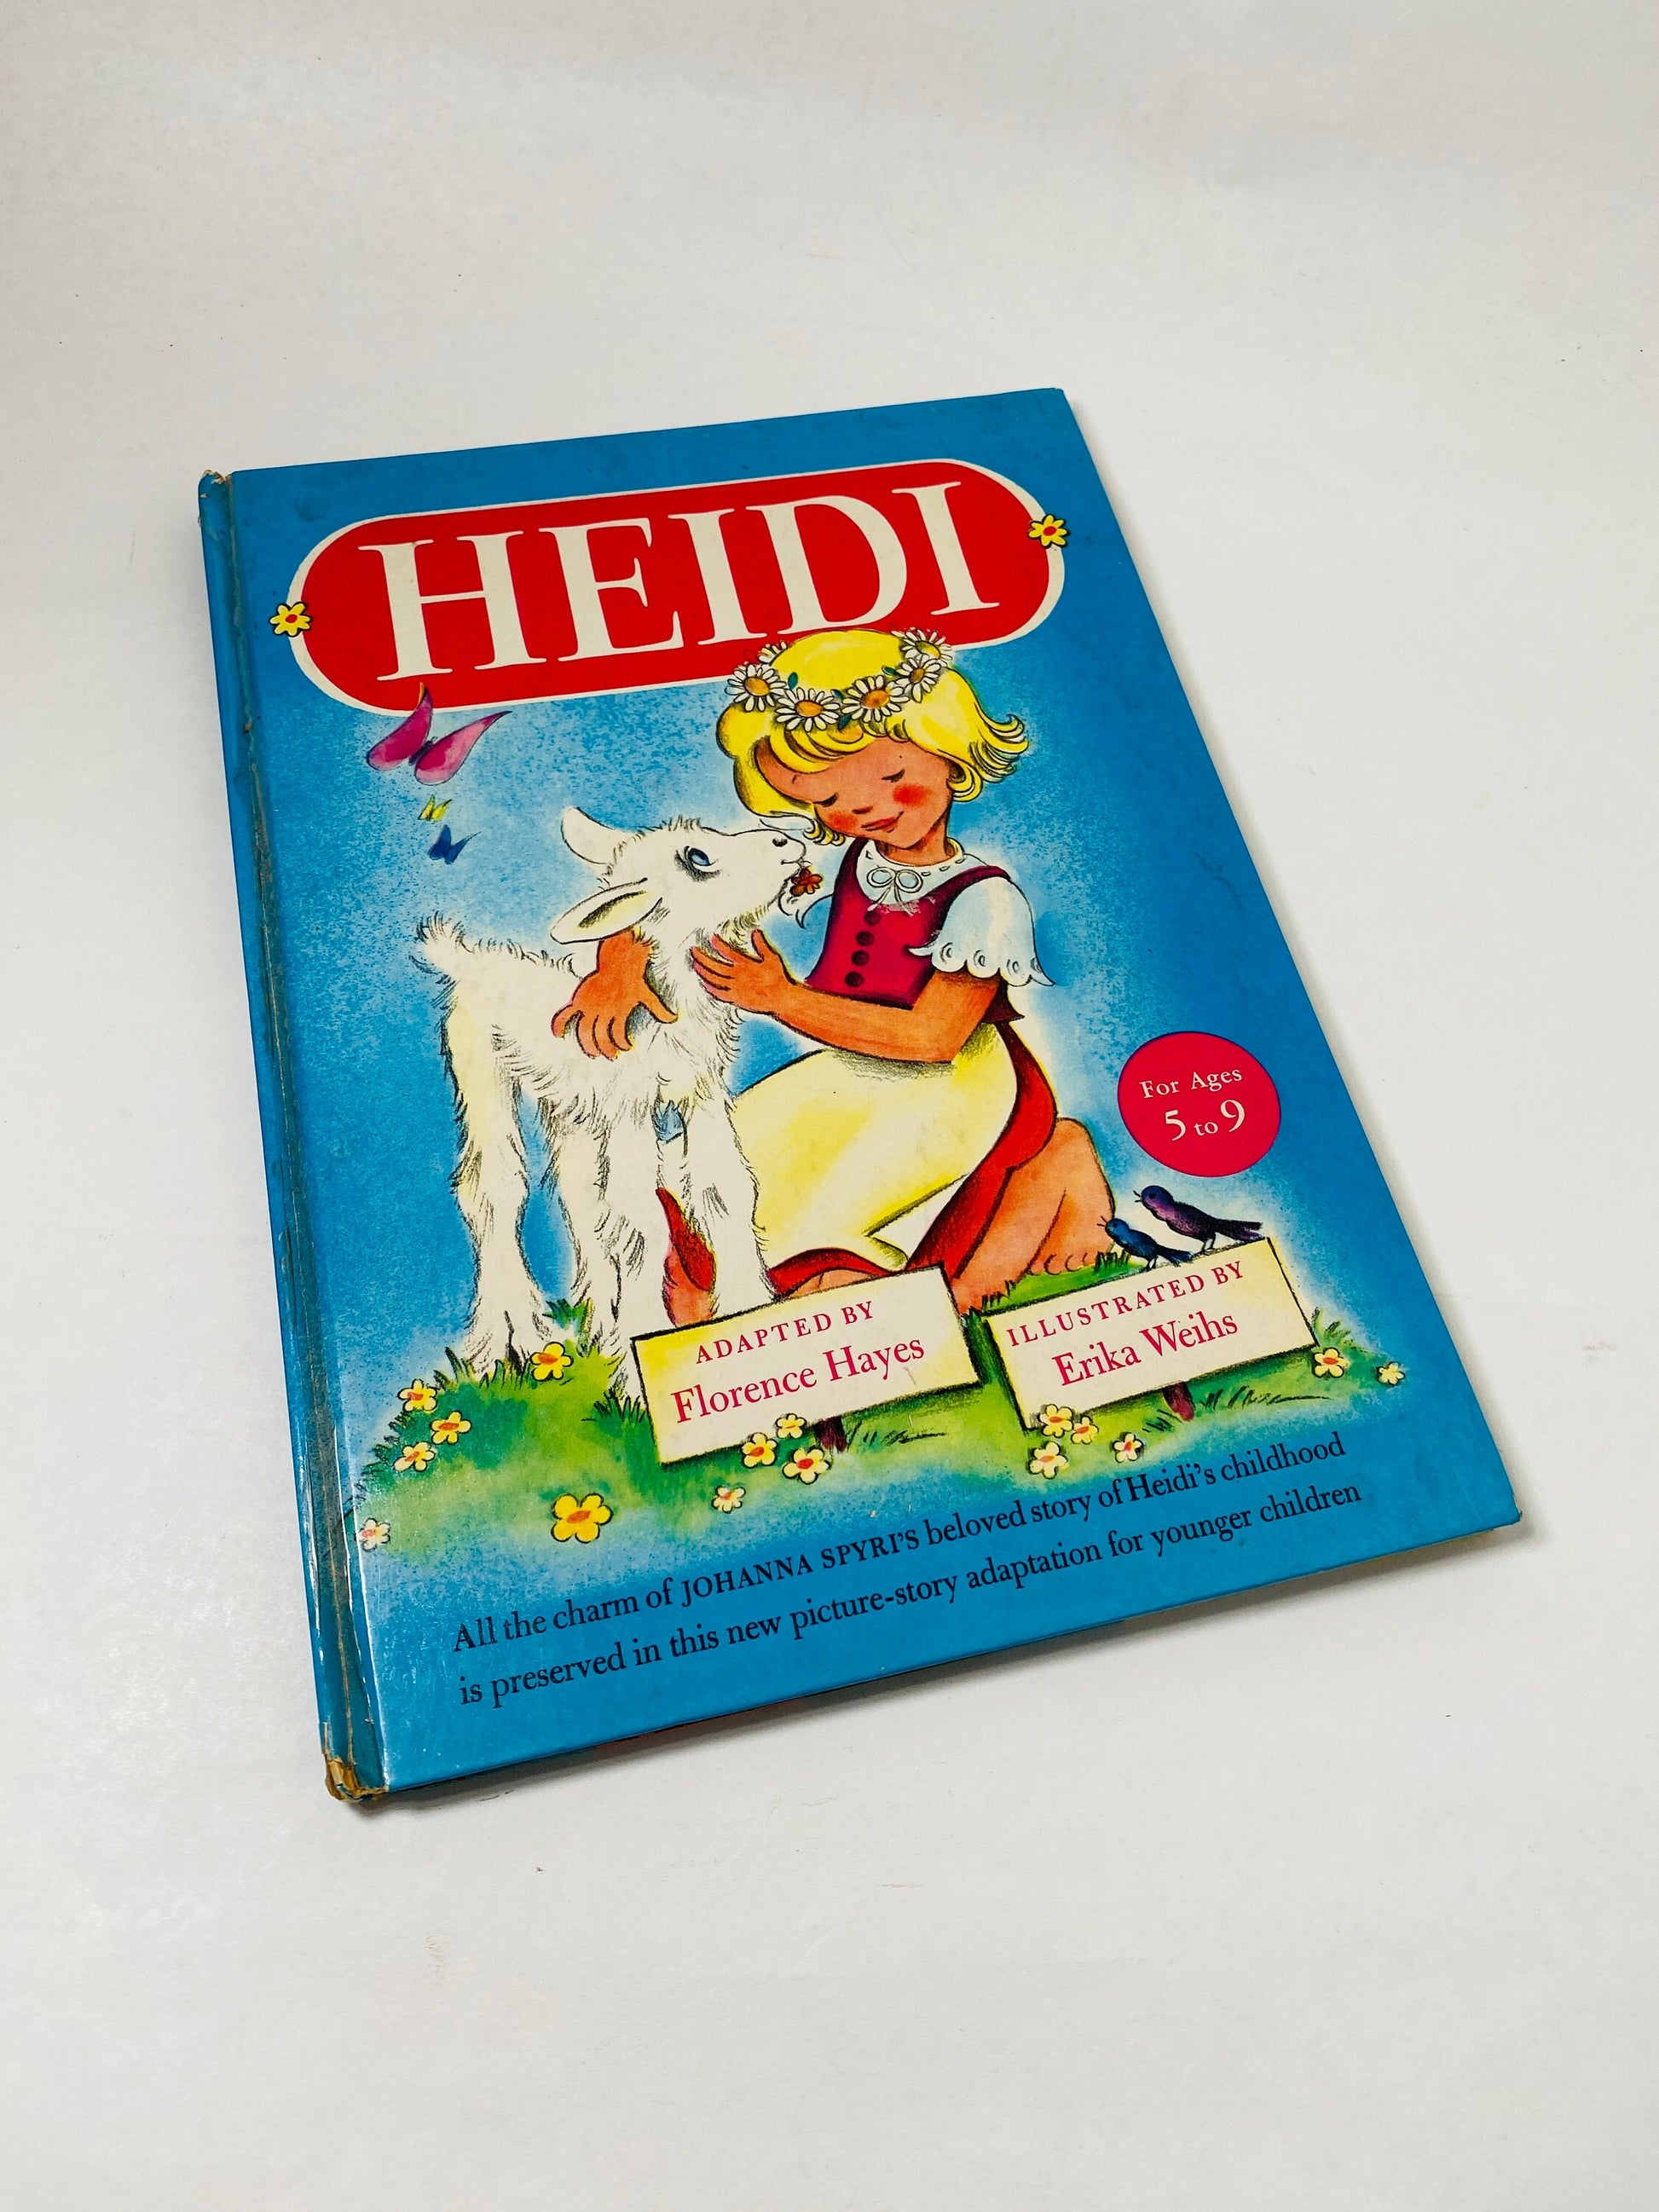 Heidi vintage Illustrated book circa 1946 by Johanna Spyri adapted by Florence Hayes illustrated by Erika Wihs Children's nursery decor